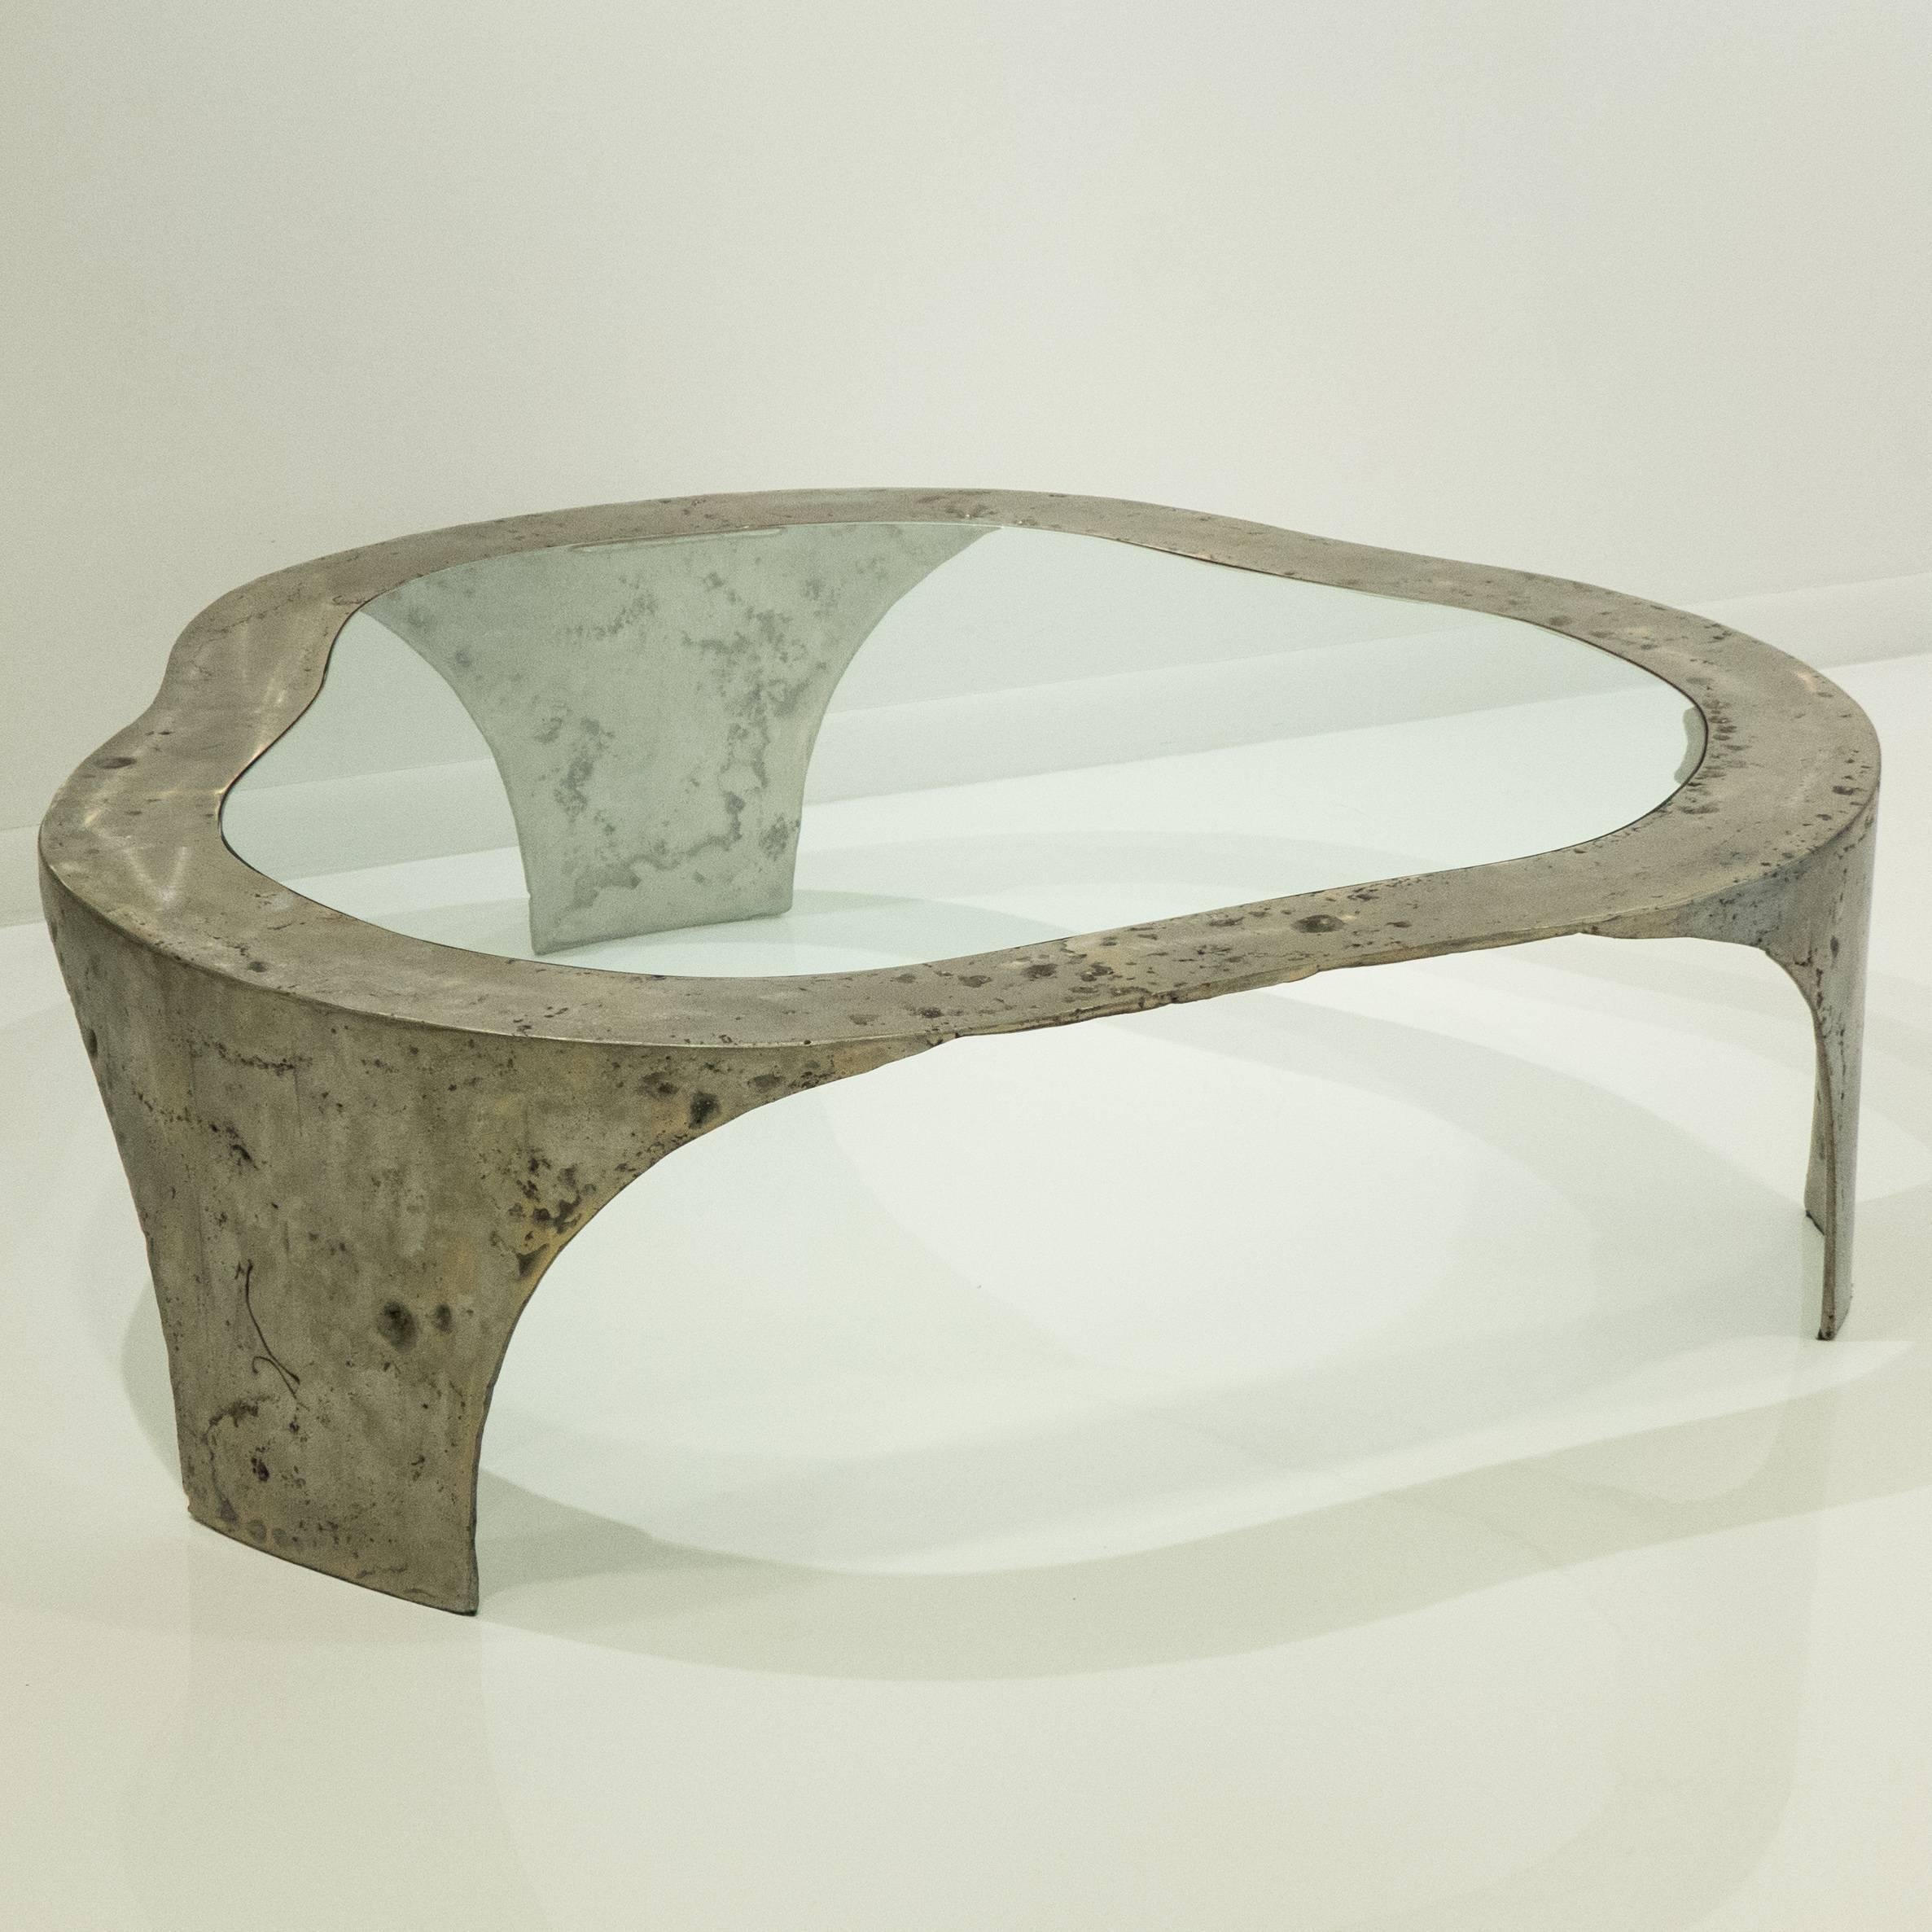 Large free-form "Duomo" cocktail table of steel with a pewter and copper wash, and a glass insert. By New York City artist and designer Silas Seandel, circa 2000.
From the original owner, with documentation from the project.